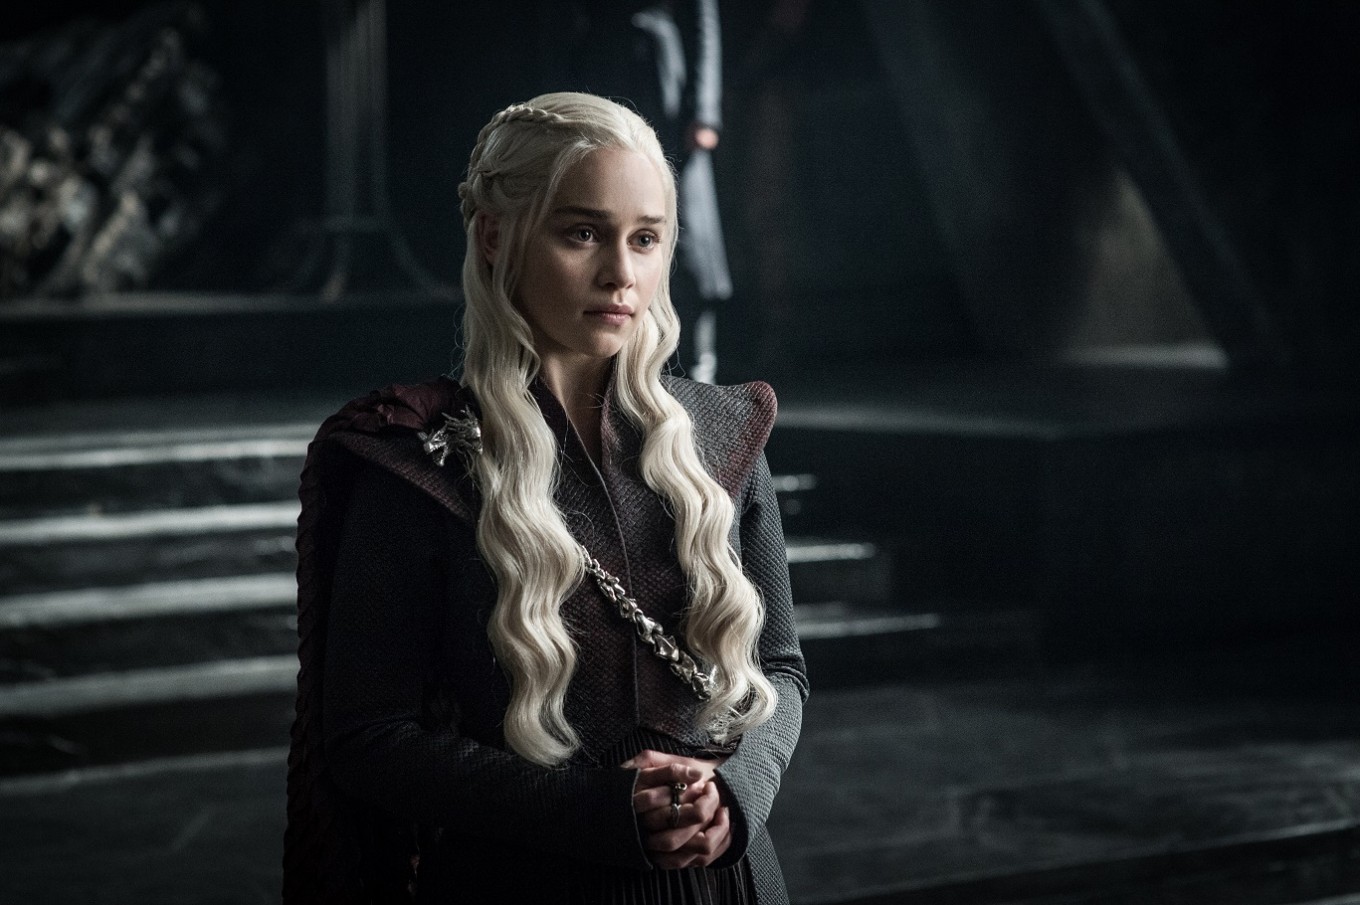 Emmys 2019: Why Game of Thrones Failed to Break One Last Emmys Record